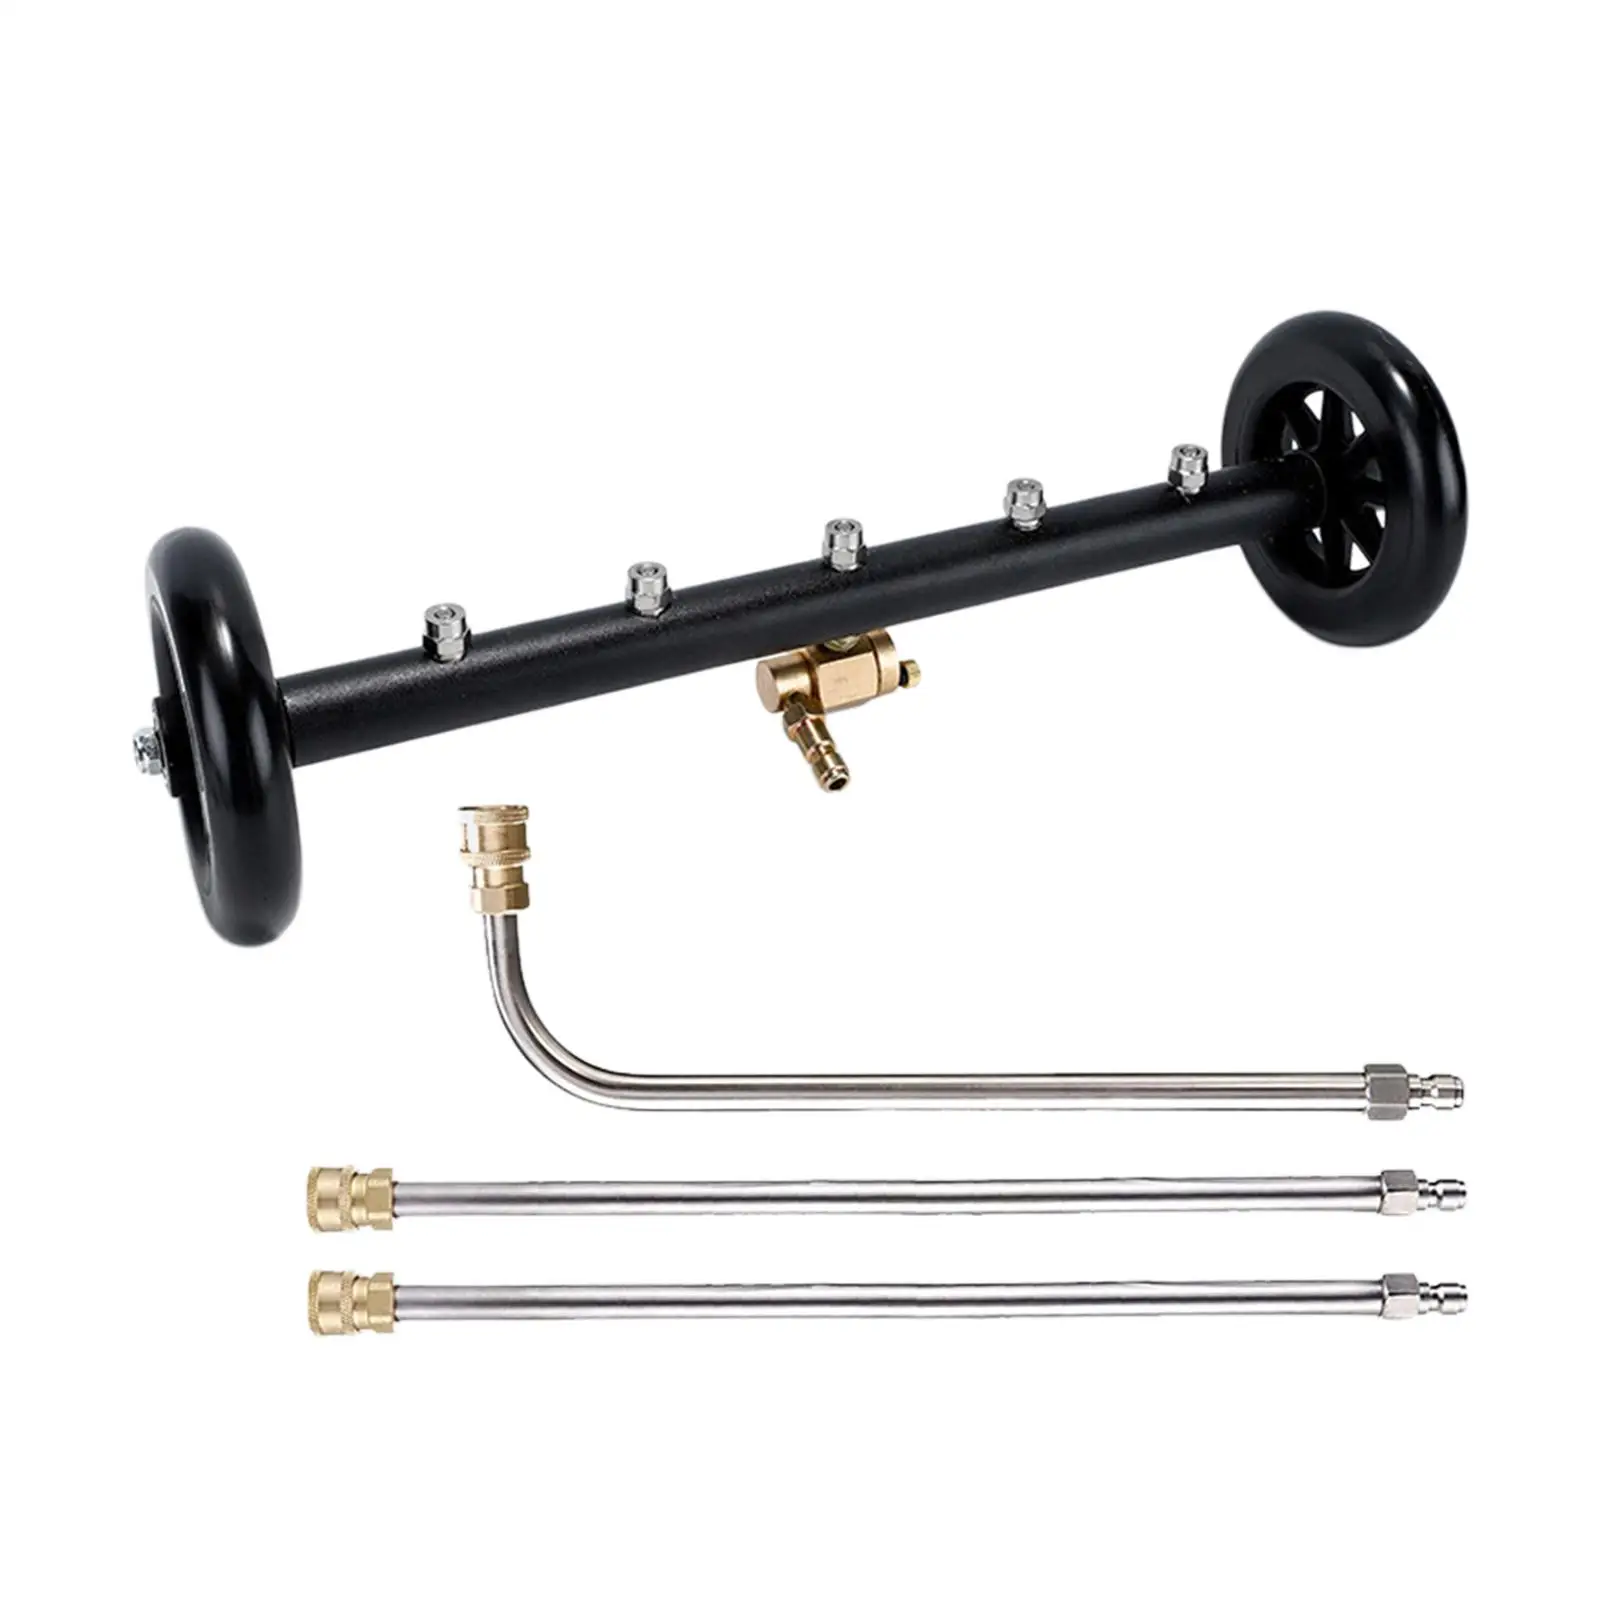 Pressure Washer Undercarriage Cleaner with 3 Pieces Extension  for Patios